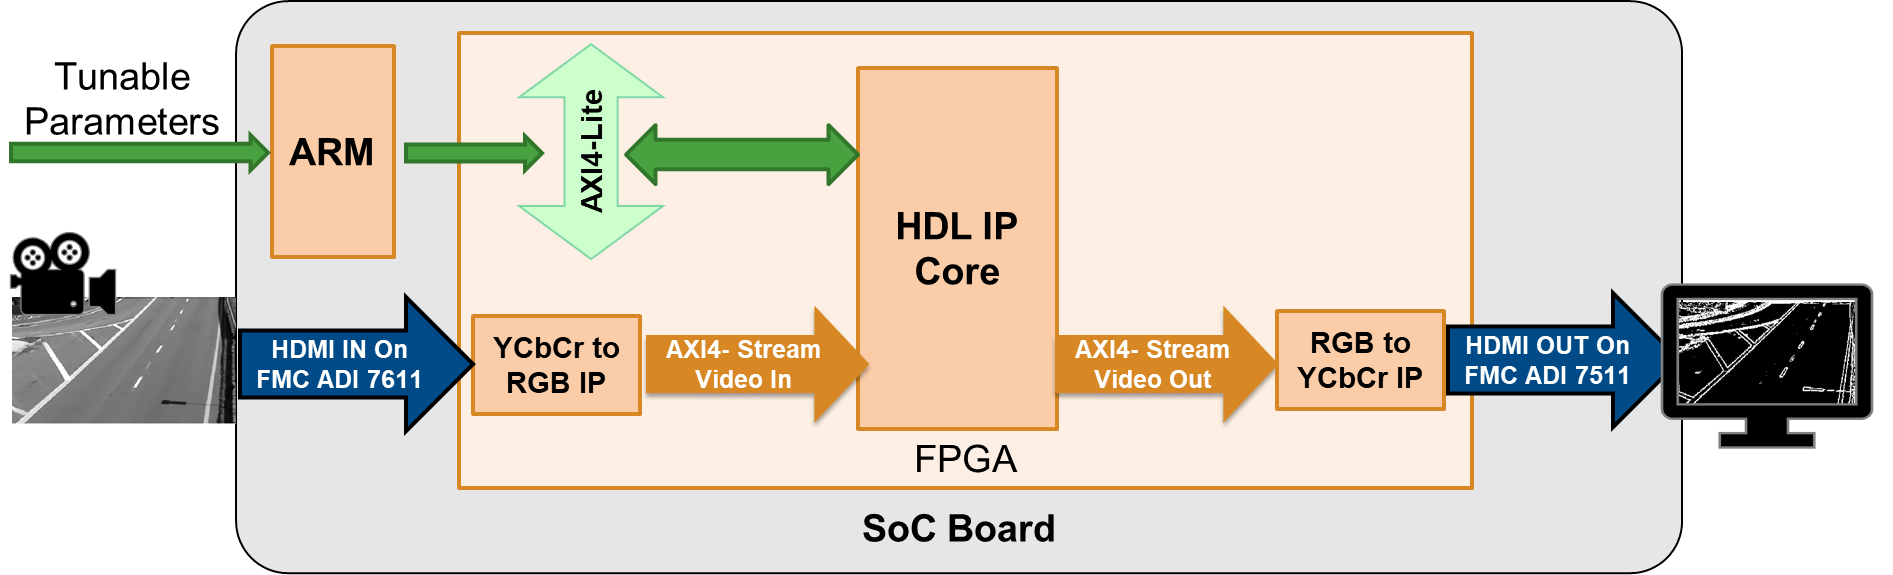 Deploy Frame-Based Models with AXI4-Stream Video Interfaces in Zynq-Based Hardware